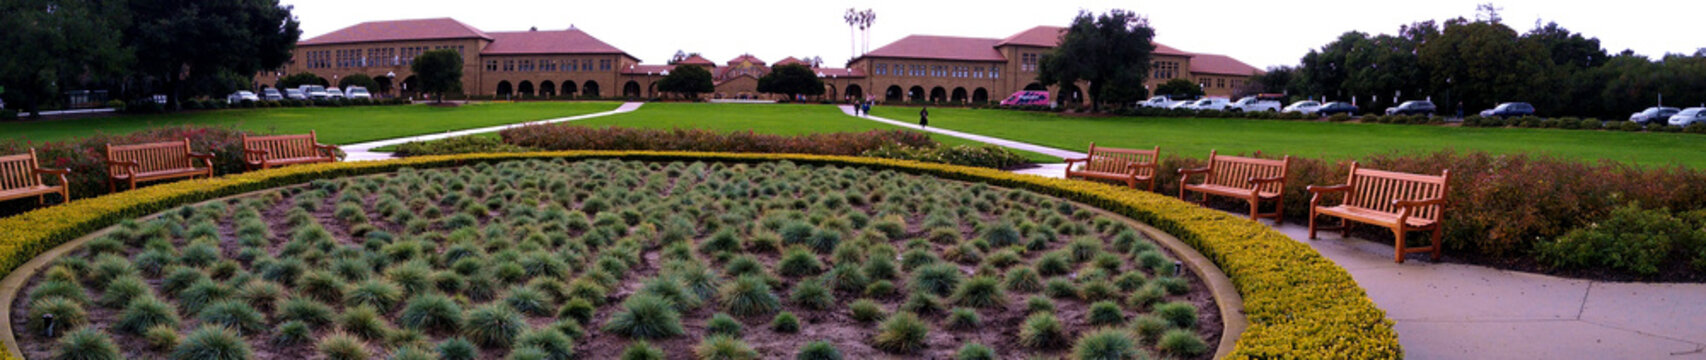 Stanford Oval in the front courtyard of Stanford University